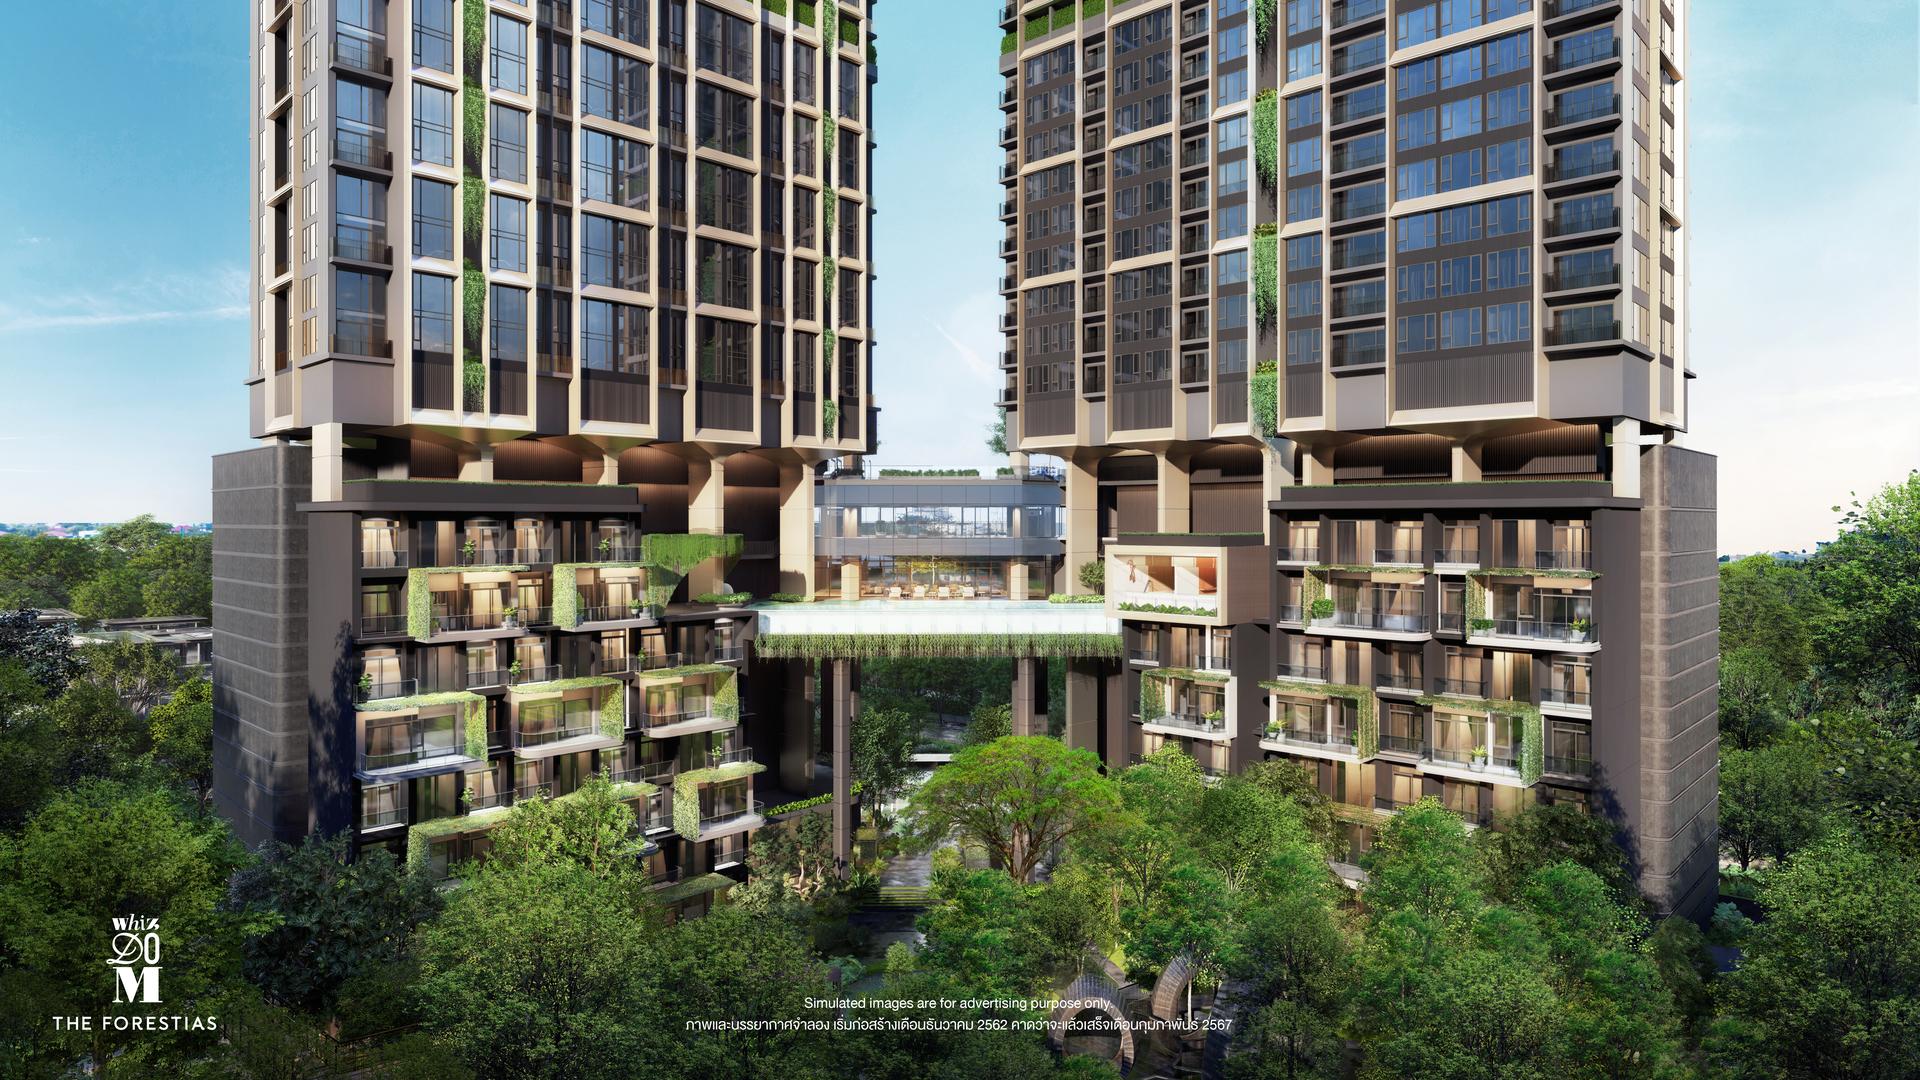 The Forestias in Thailand: A Green, Urban Oasis